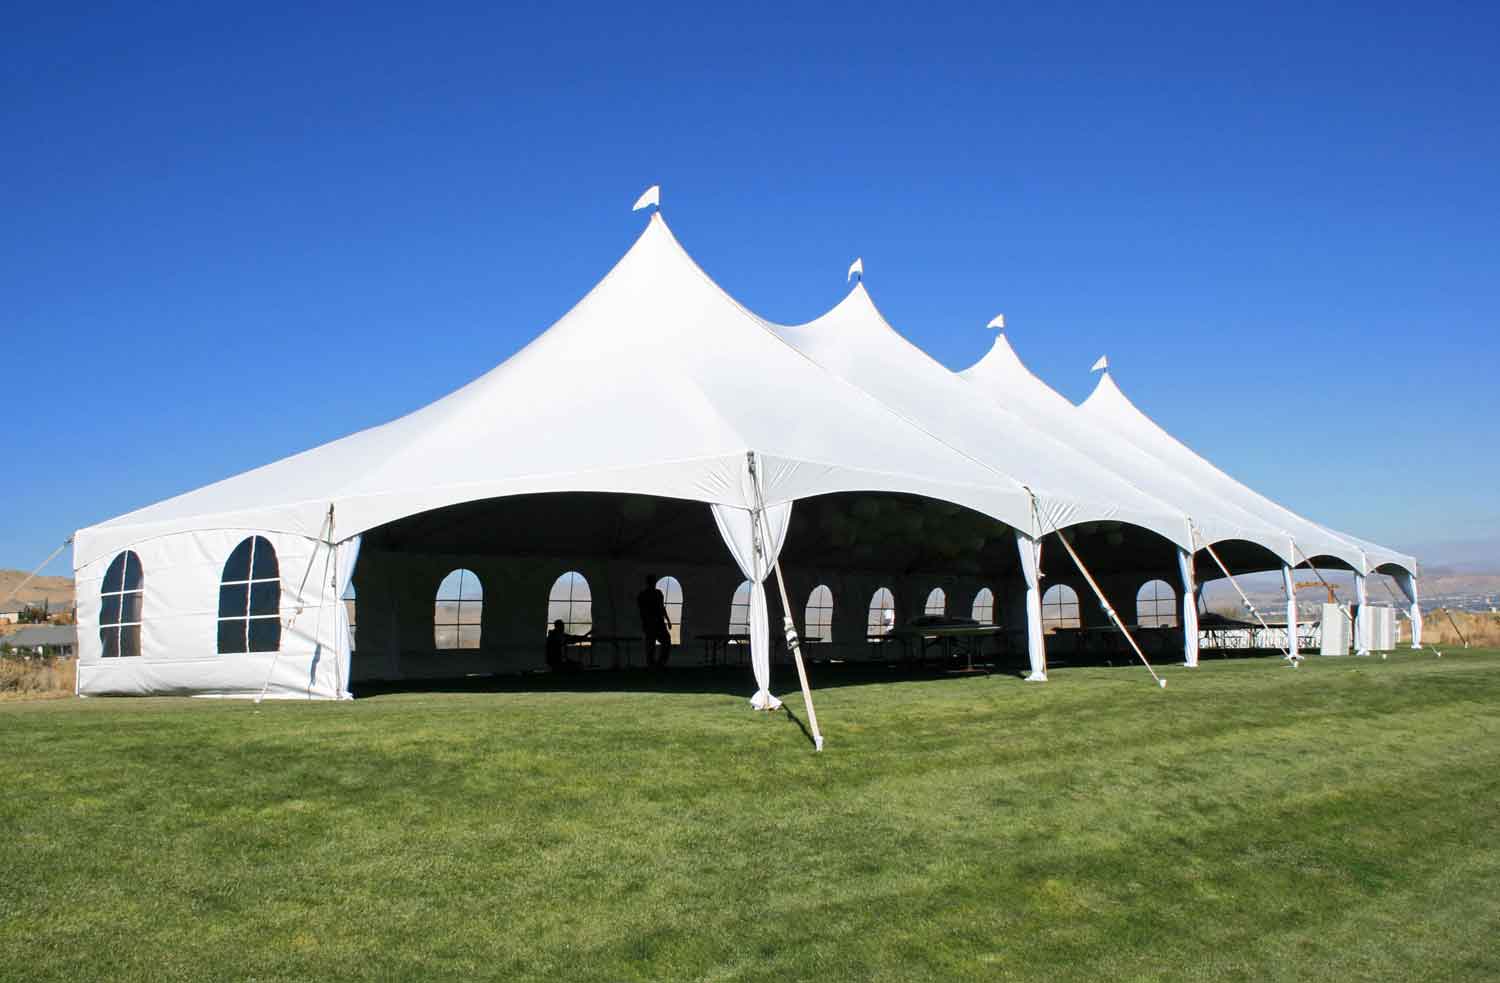 4 Top Advantages of Renting a Tent for an Outdoor Party